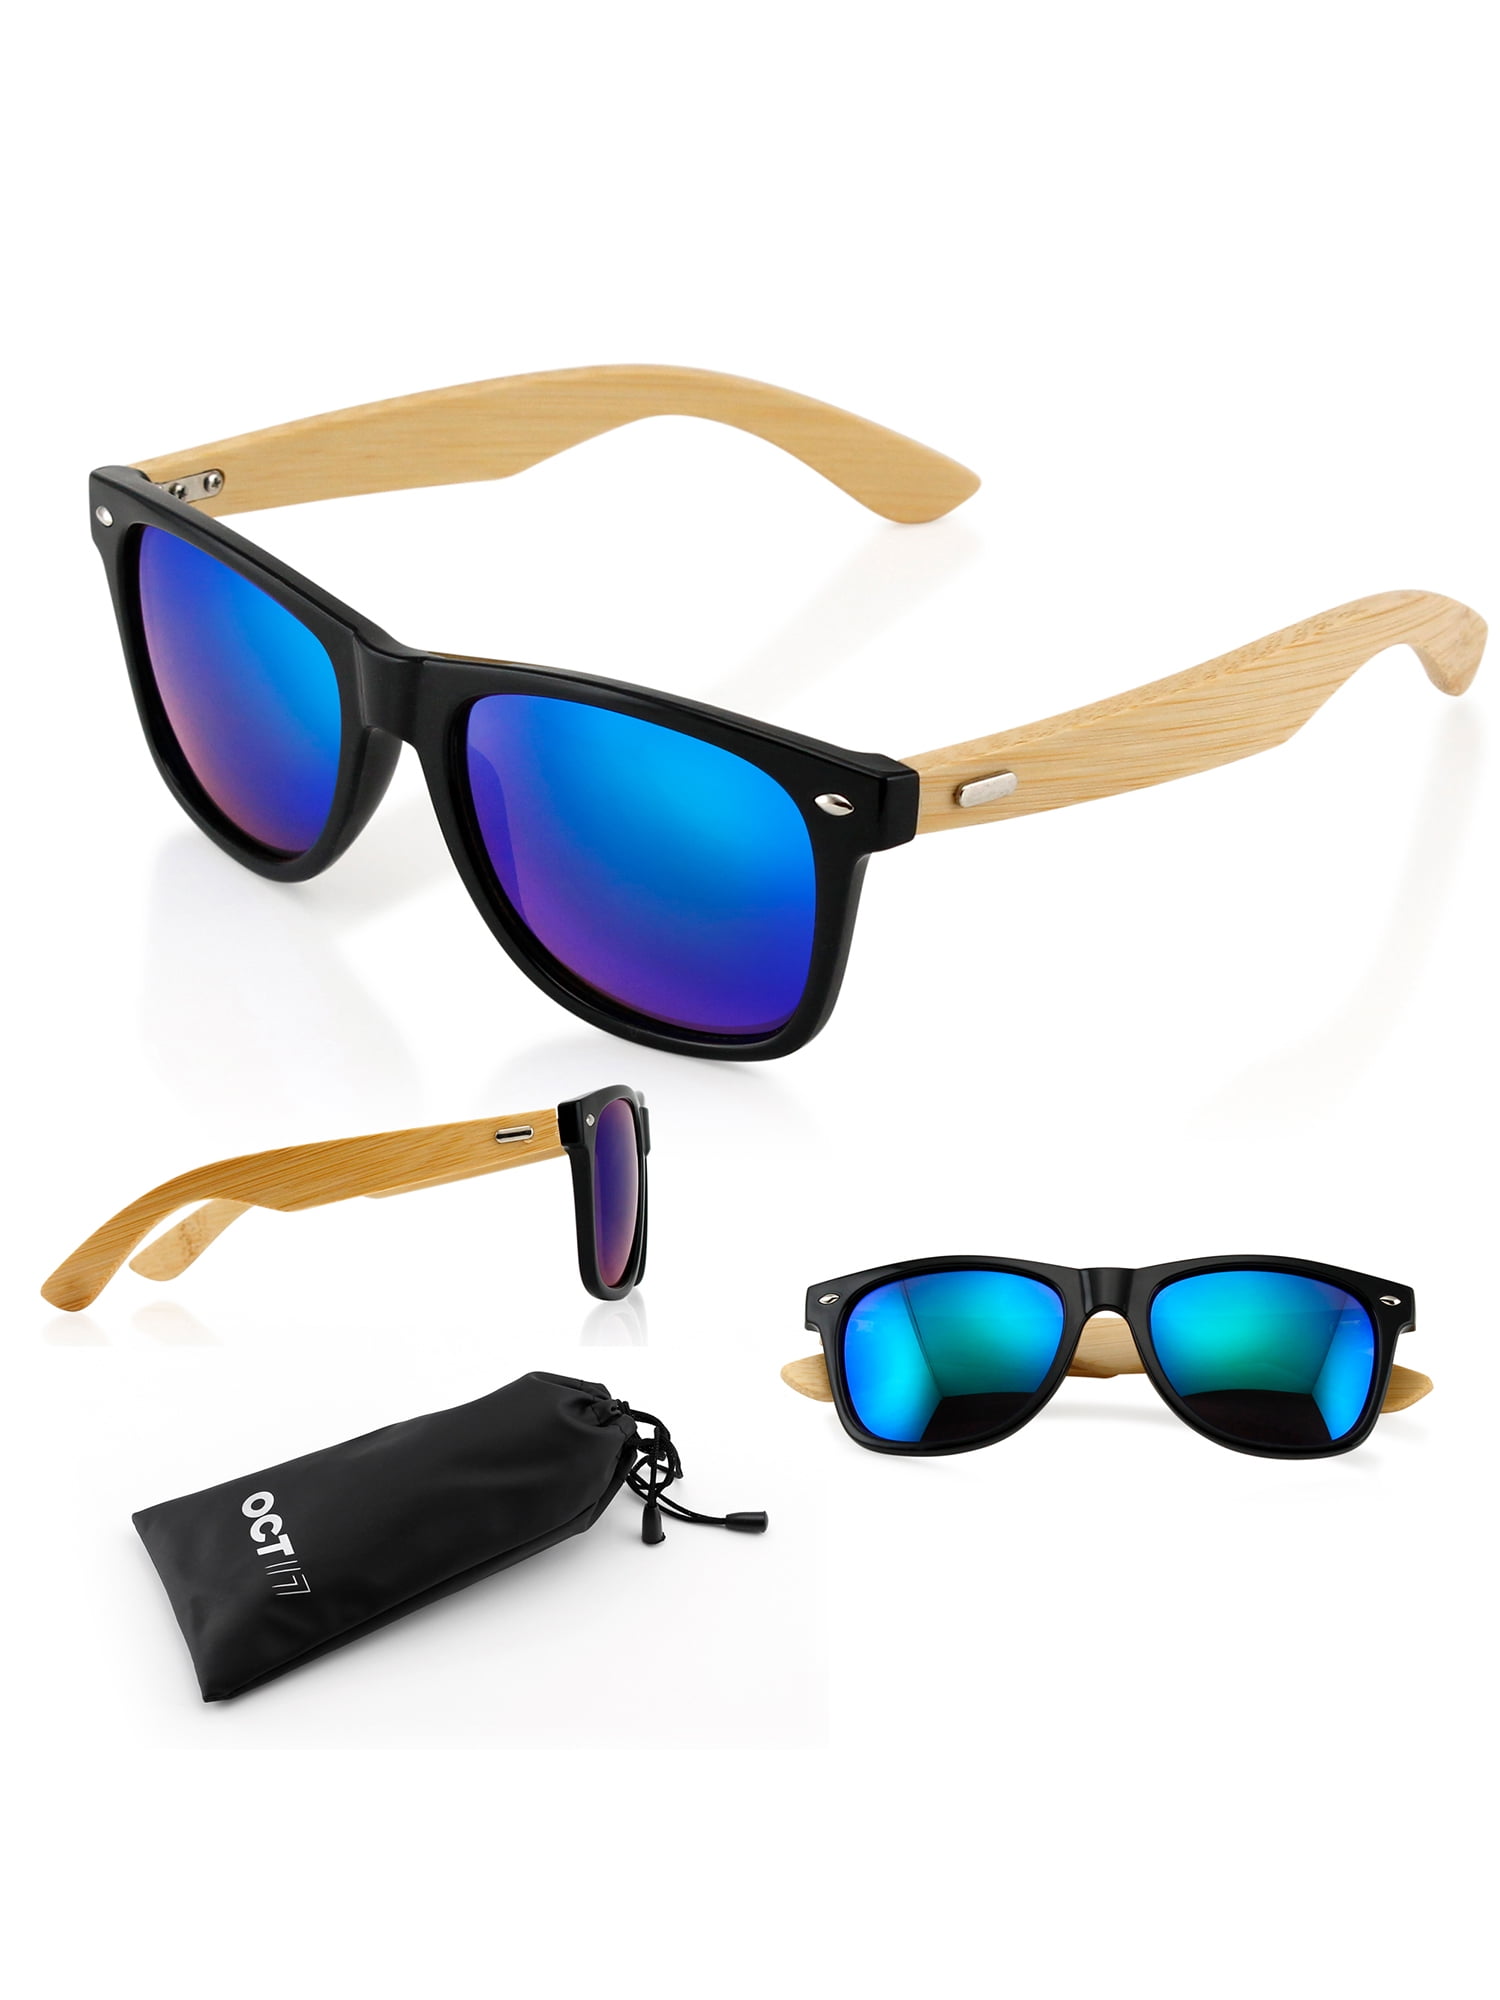 Men's 2019 Handcrafted Natural Bamboo Frame Blue Mirror Polarized Sunglasses